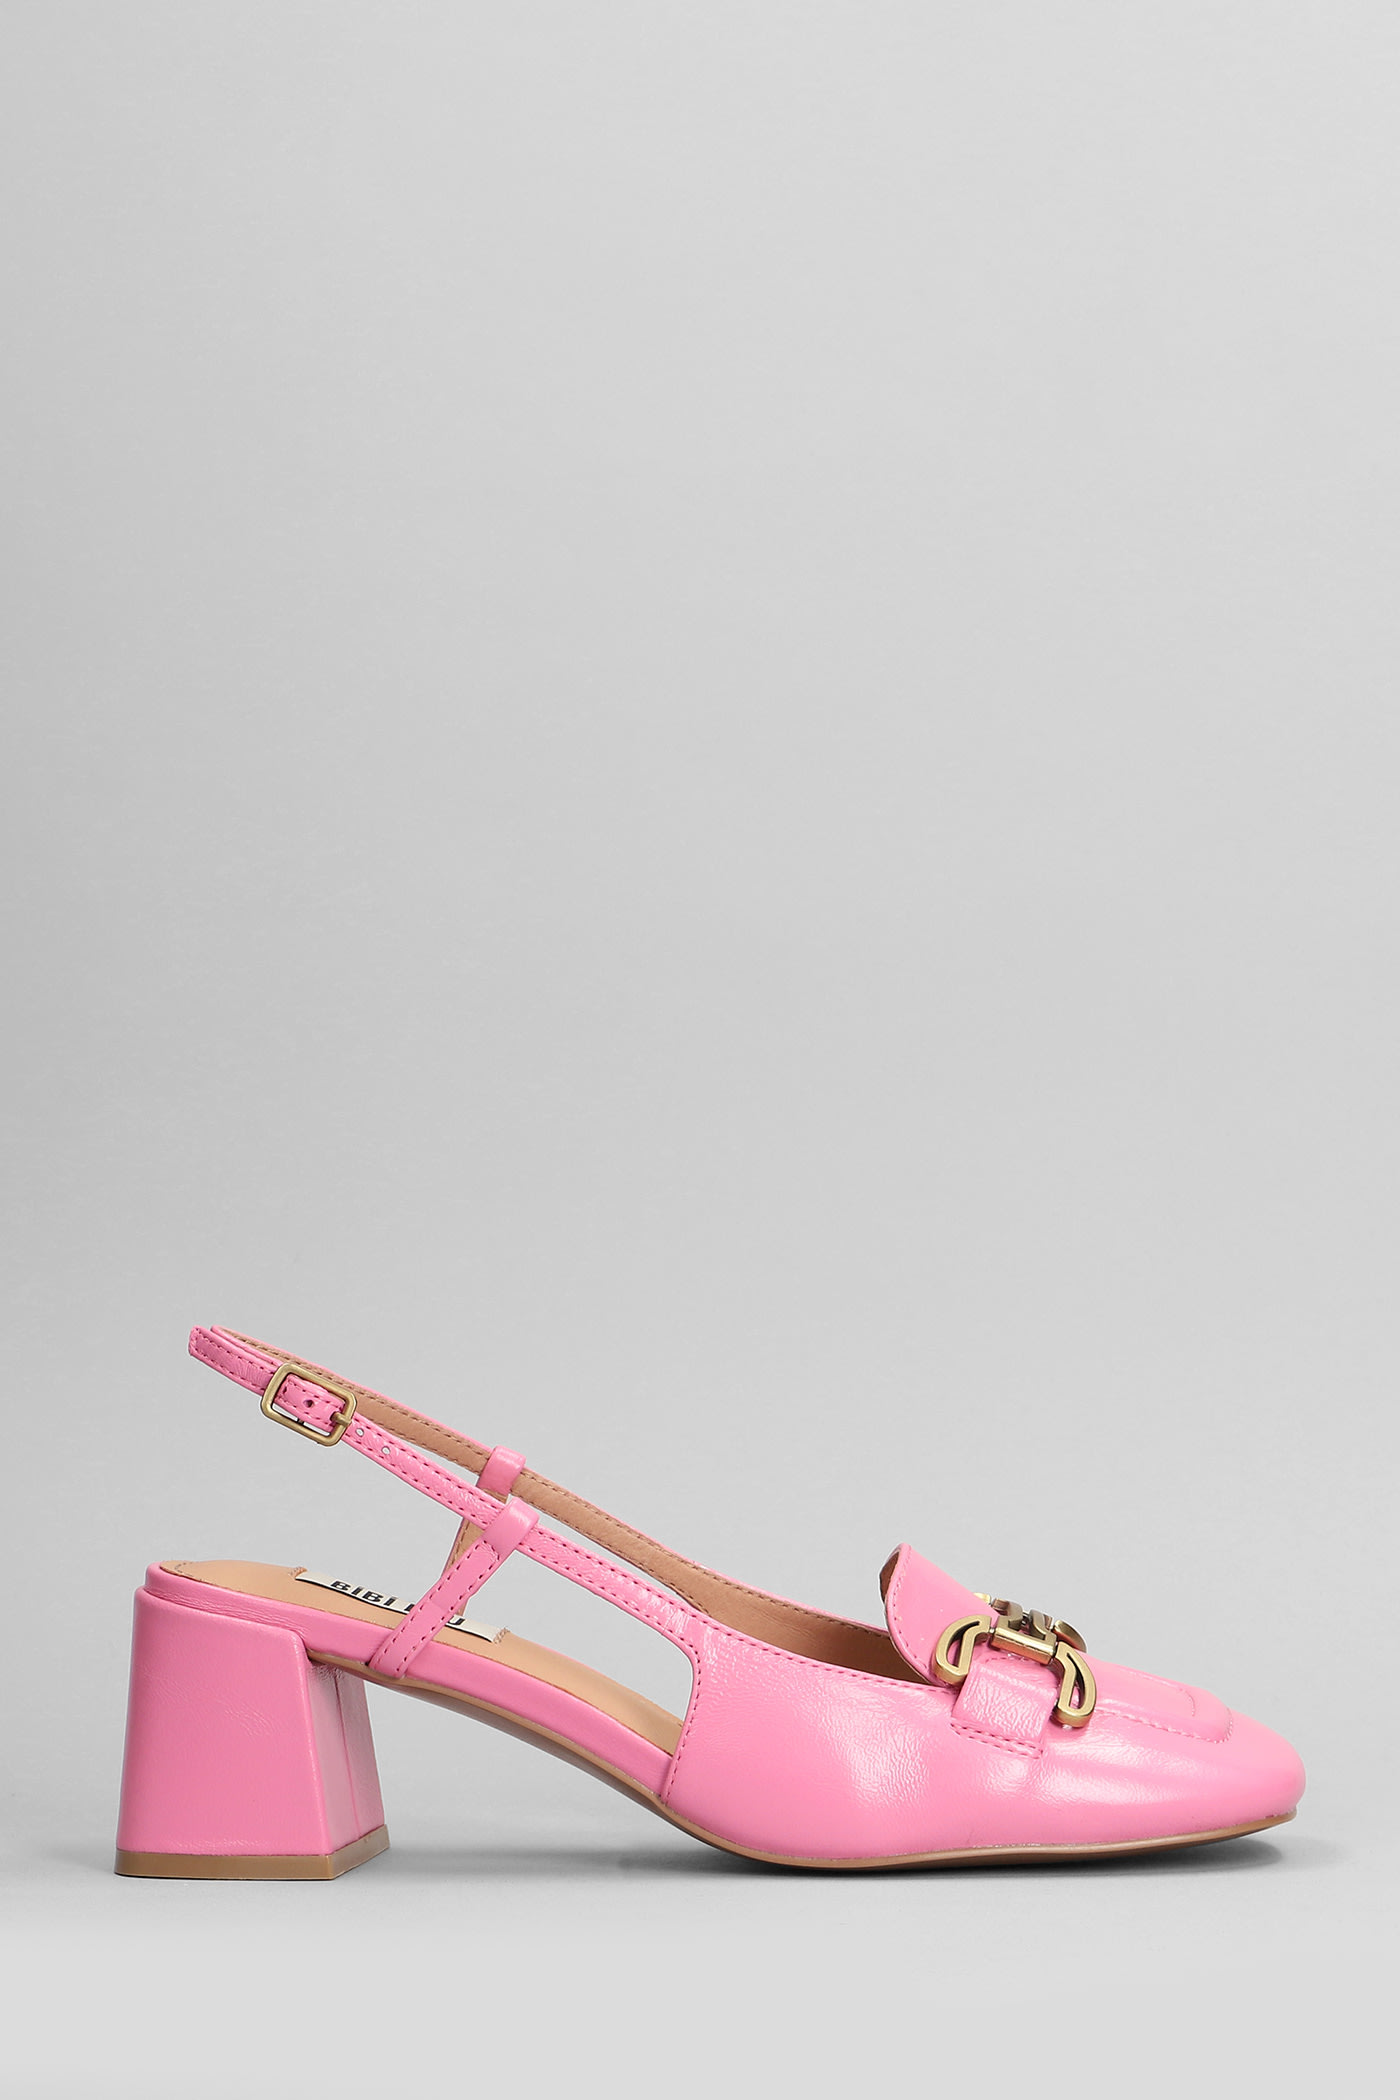 Renee 60 Pumps In Rose-pink Leather